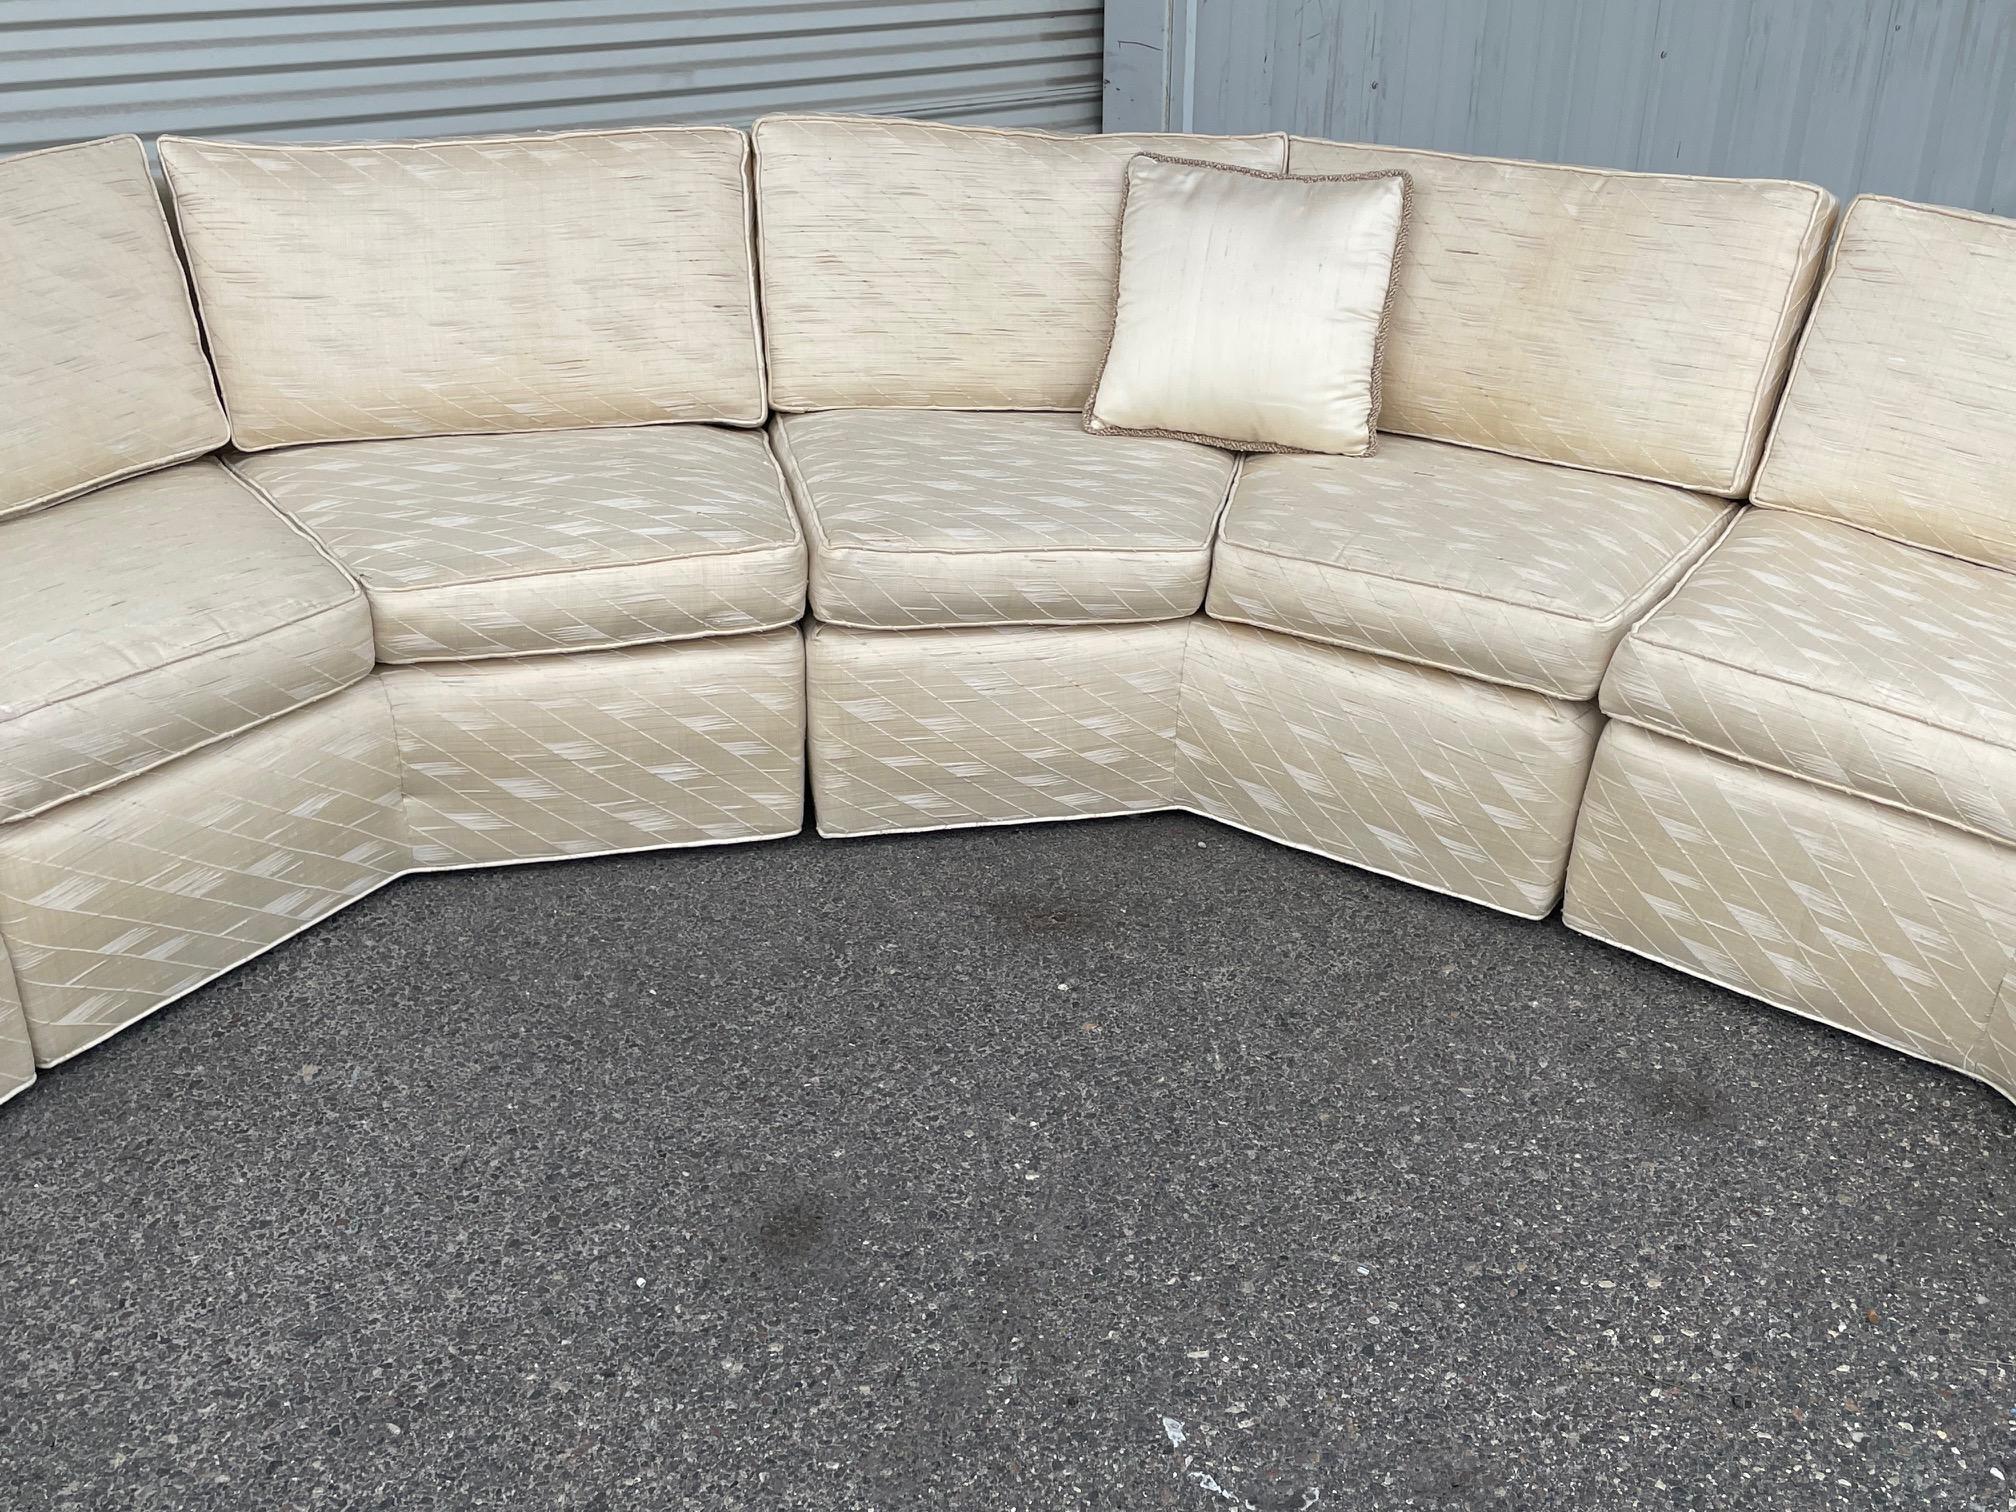 Curved Circular Sectional Sofa in the Manner of Milo Baughman In Good Condition For Sale In Jacksonville, FL